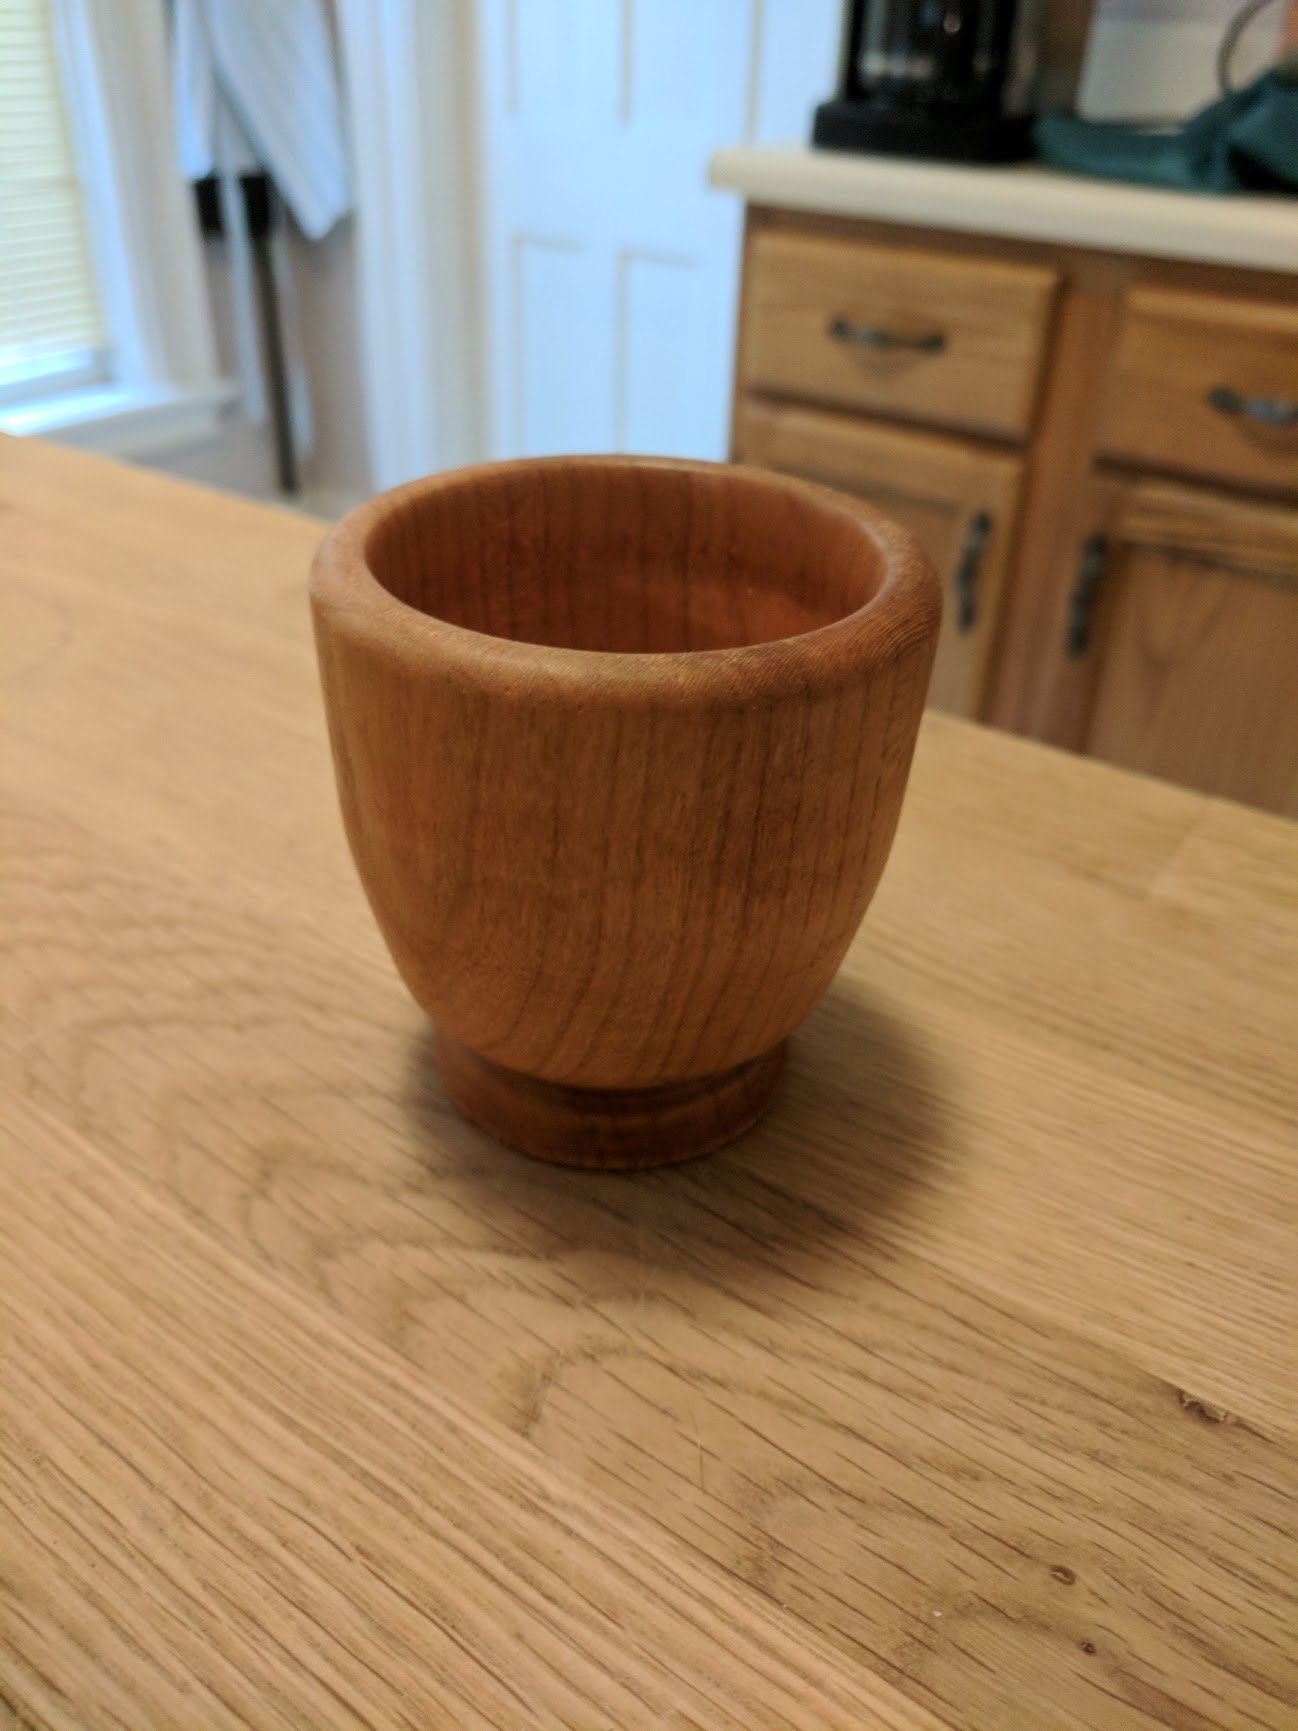 One of my first wood turnings, cut from a 3x3 cherry blank